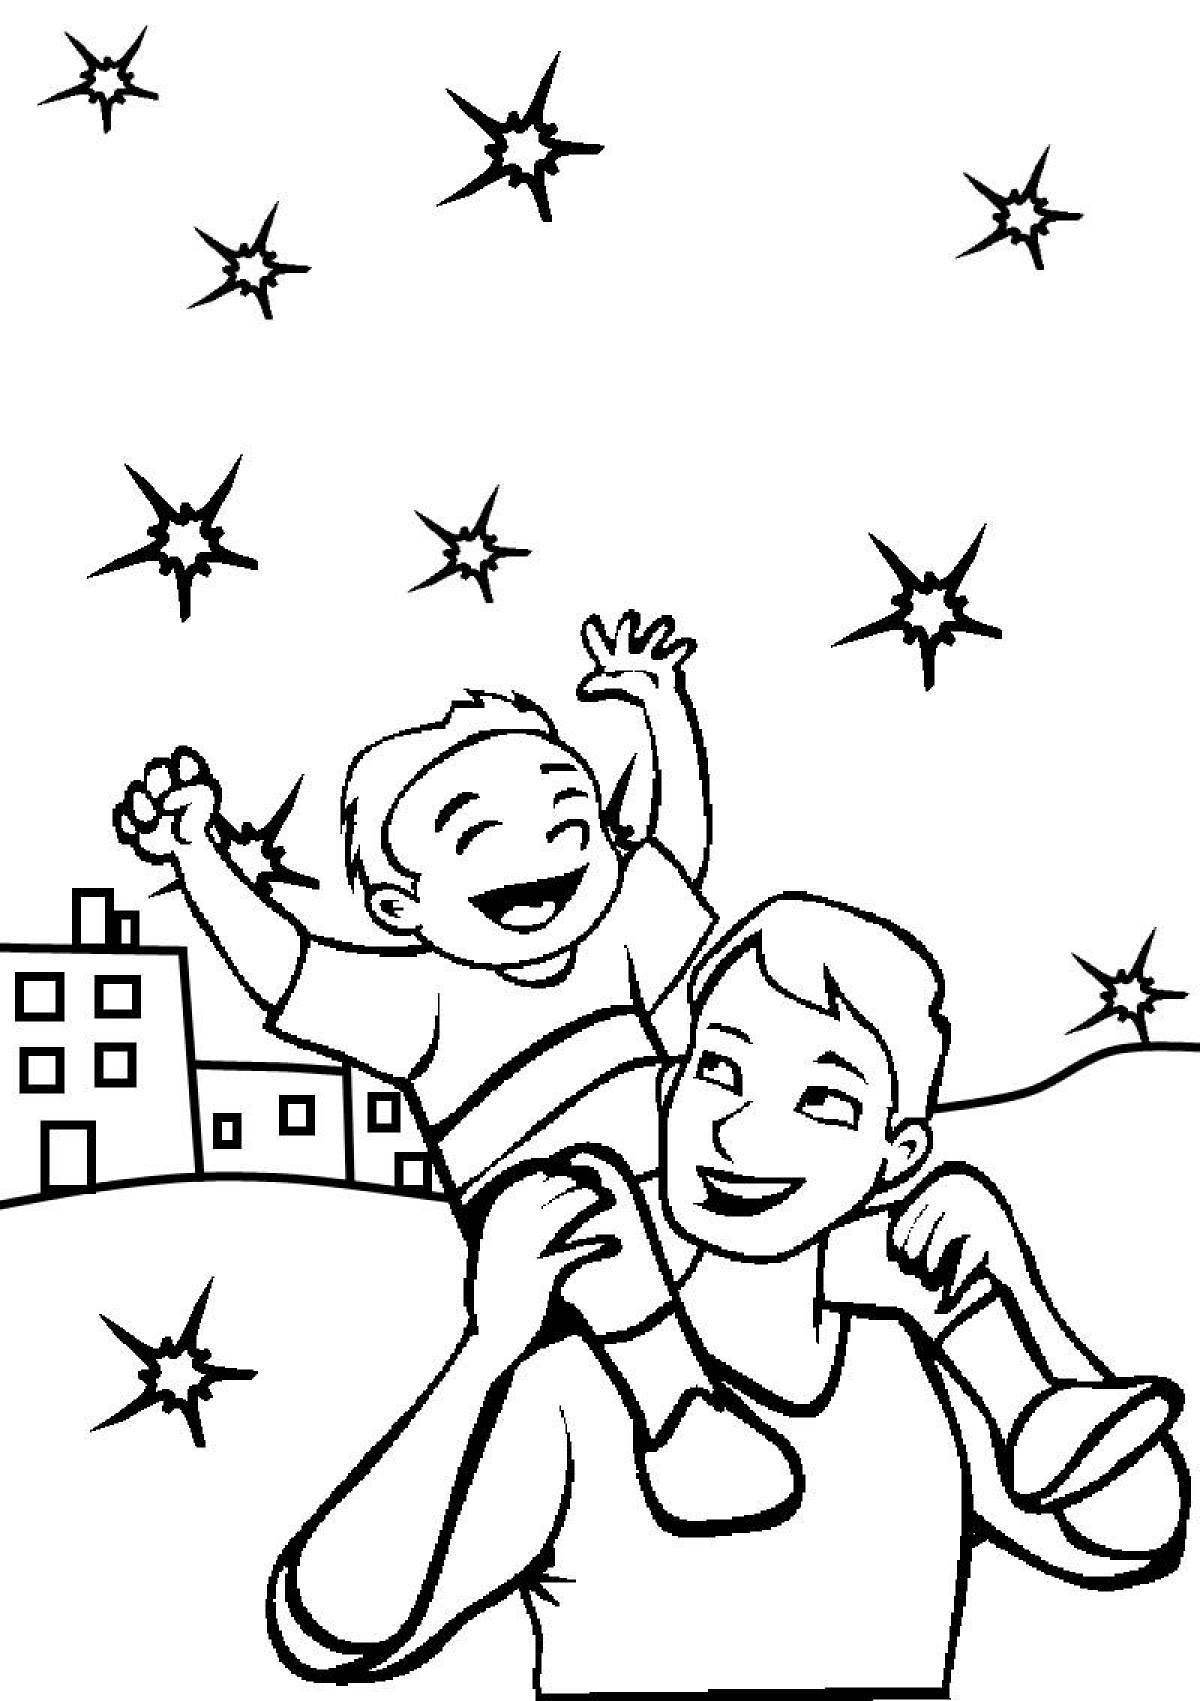 Victory Day coloring book